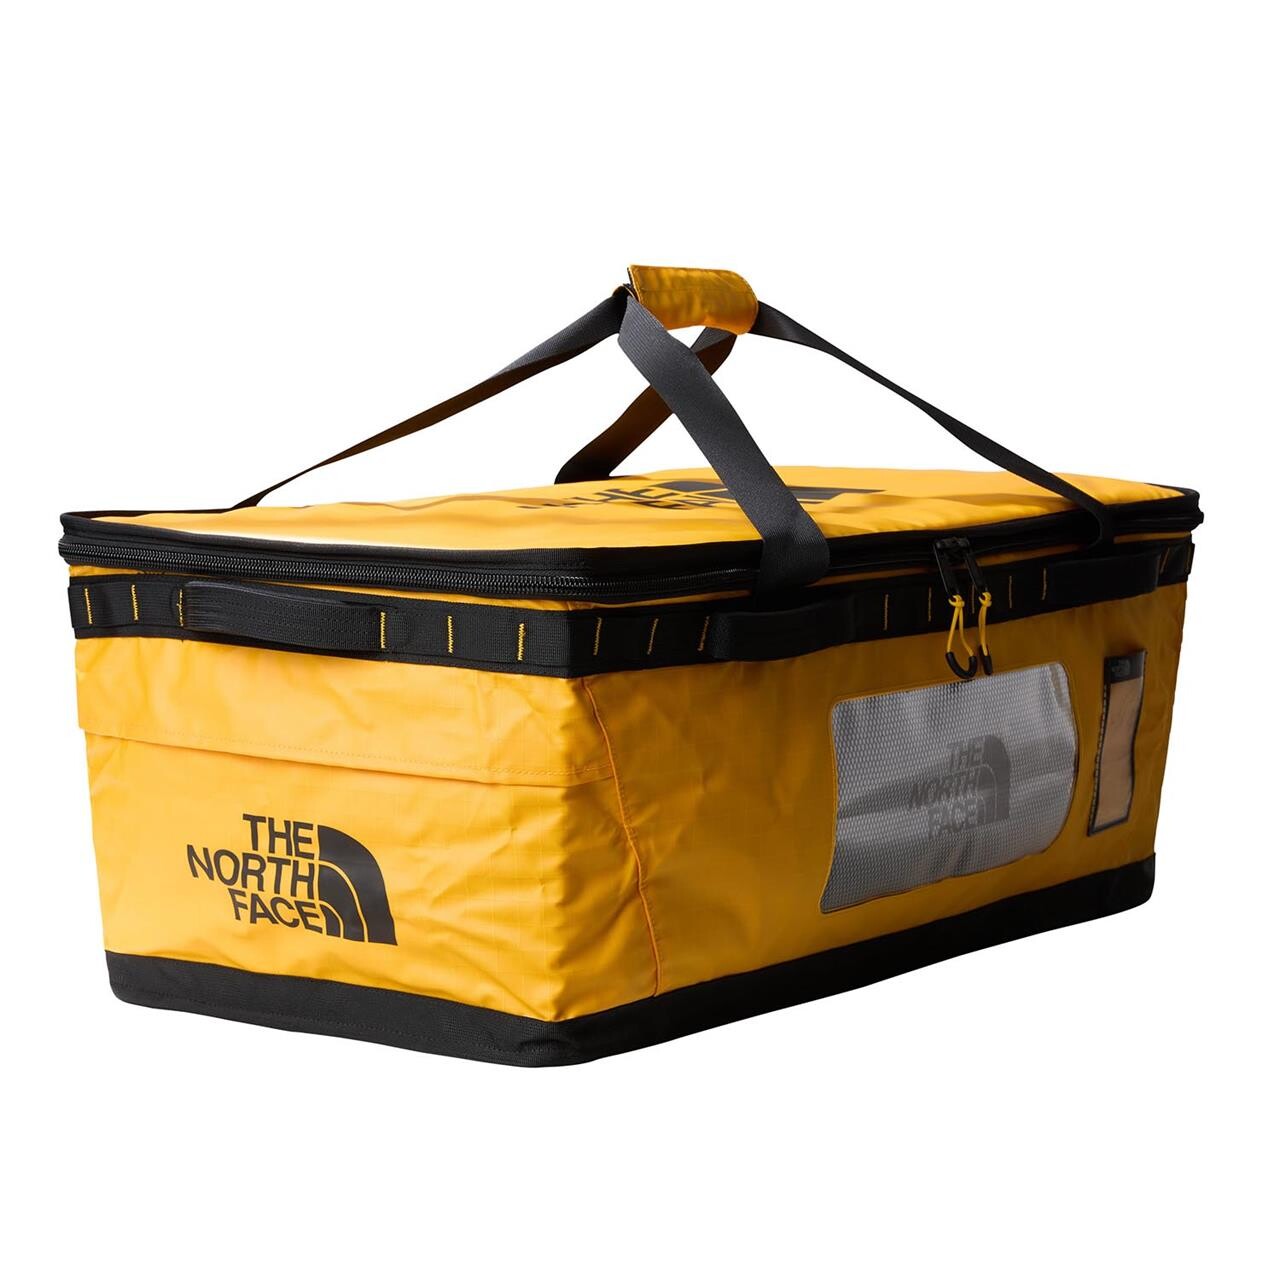 Billede af The North Face Base Camp Gear Box Large (Gul (SUMMIT GOLD/TNF BLACK) ONE SIZE)